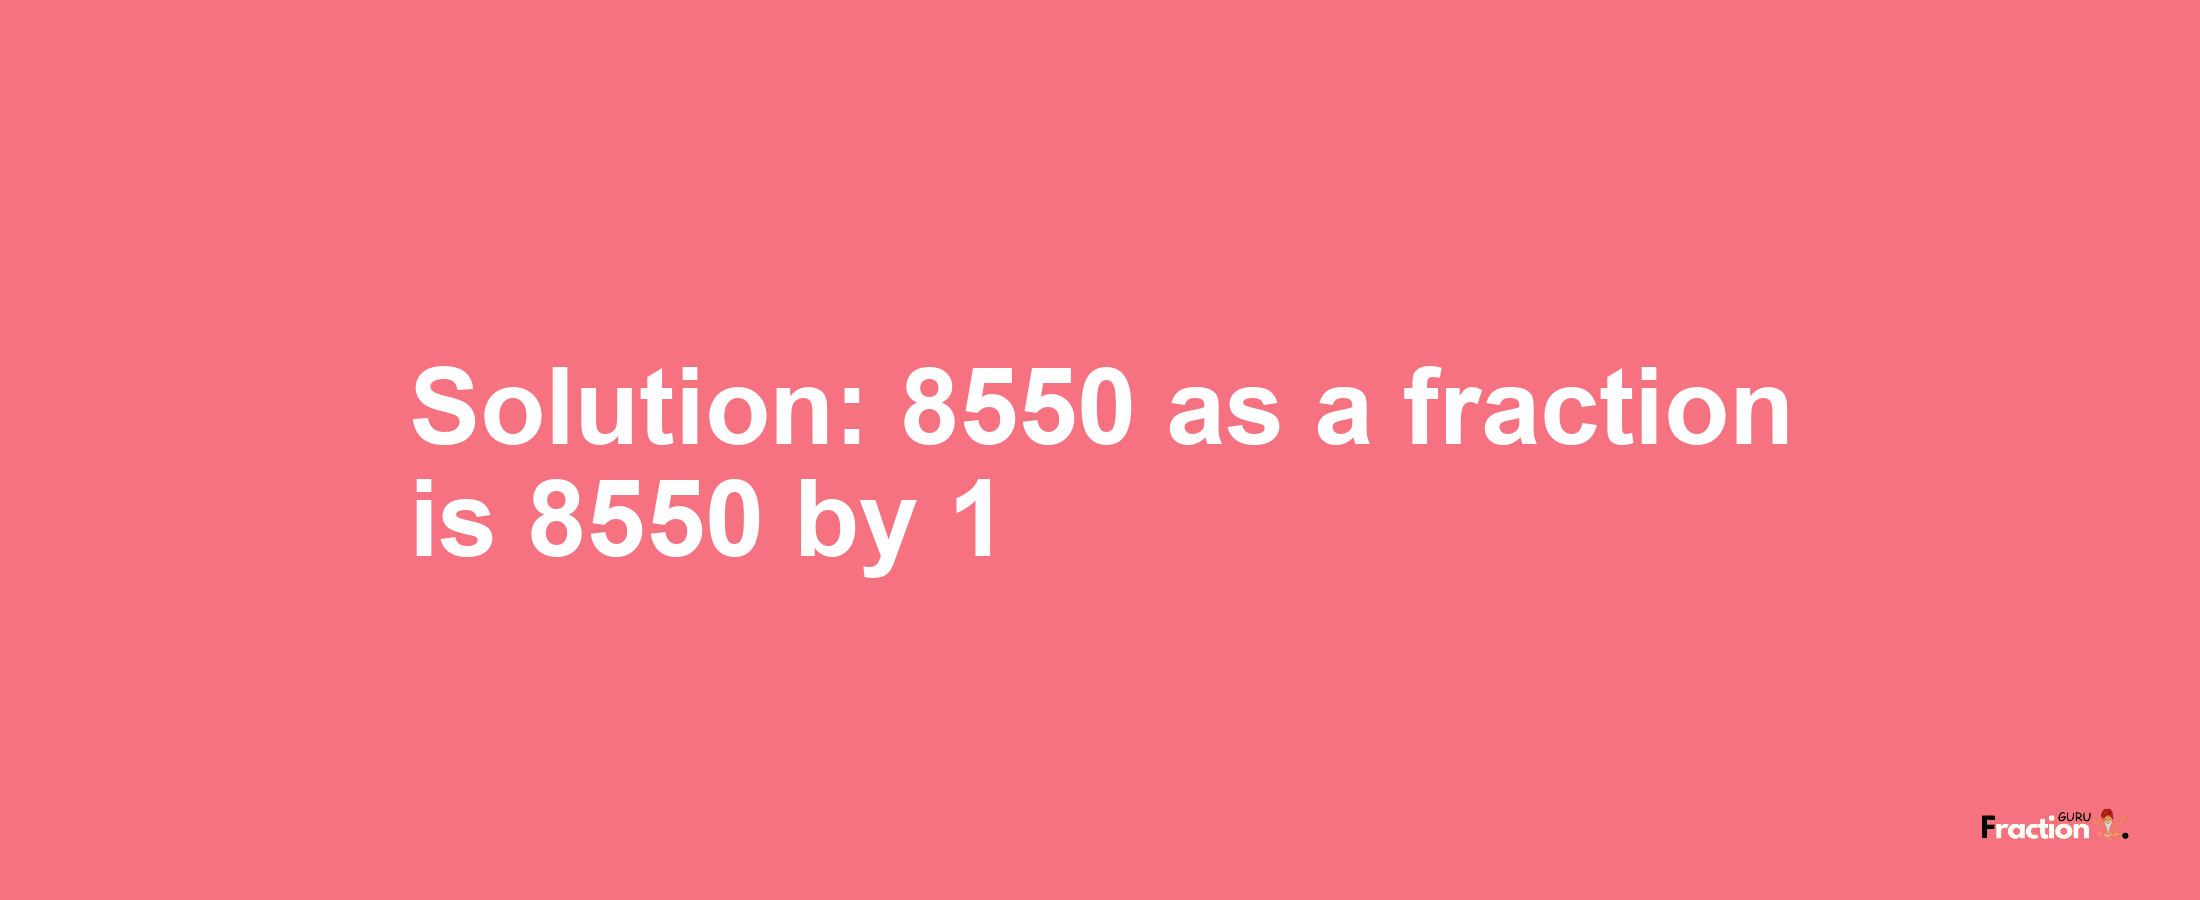 Solution:8550 as a fraction is 8550/1